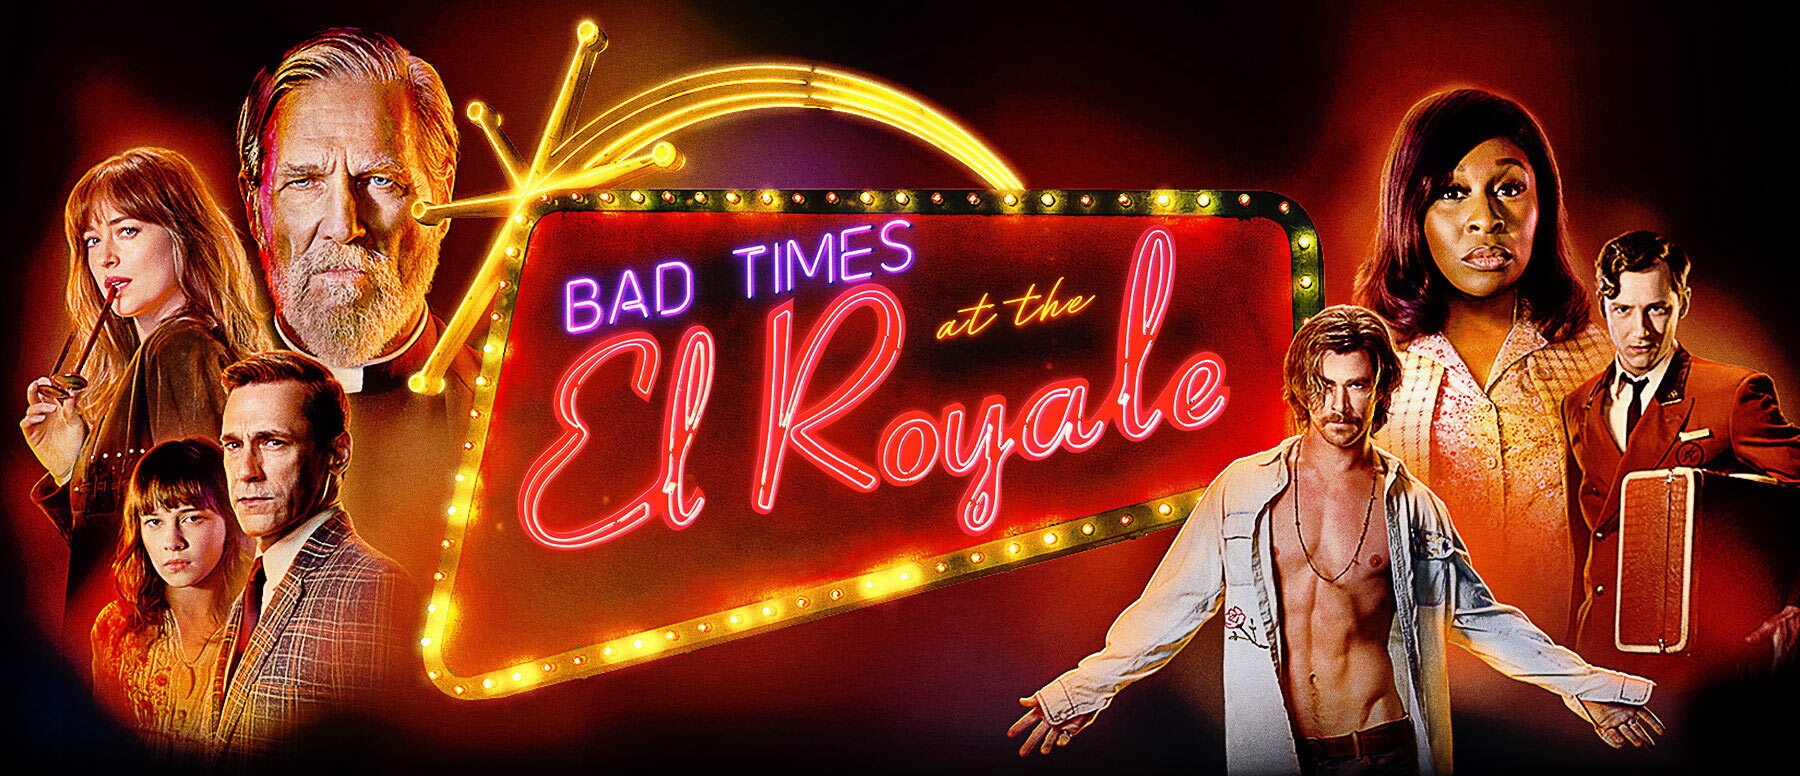 31-facts-about-the-movie-bad-times-at-the-el-royale